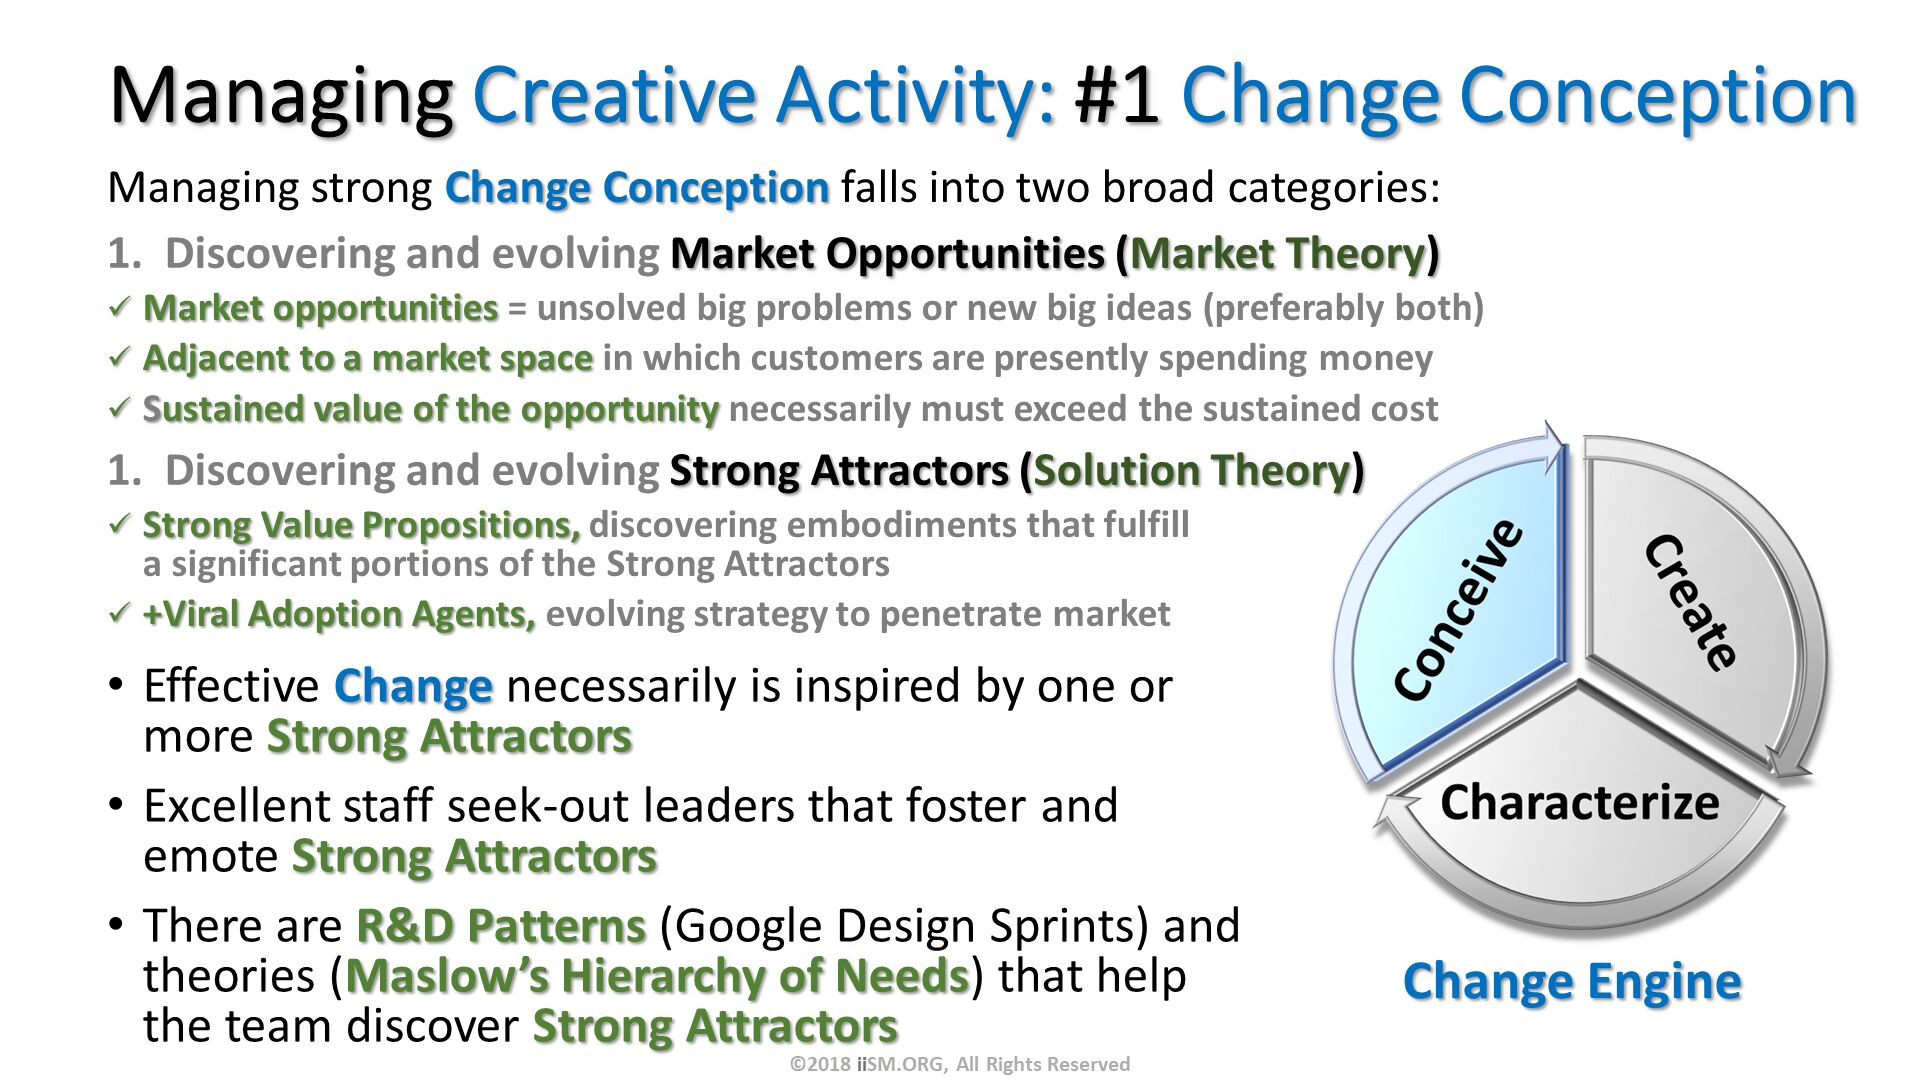 Managing Creative Activity: #1 Change Conception. Managing strong Change Conception falls into two broad categories:
Discovering and evolving Market Opportunities (Market Theory)
Market opportunities = unsolved big problems or new big ideas (preferably both)
Adjacent to a market space in which customers are presently spending money
Sustained value of the opportunity necessarily must exceed the sustained cost 
Discovering and evolving Strong Attractors (Solution Theory)
Strong Value Propositions, discovering embodiments that fulfill a significant portions of the Strong Attractors
+Viral Adoption Agents, evolving strategy to penetrate market. Effective Change necessarily is inspired by one or more Strong Attractors
Excellent staff seek-out leaders that foster and emote Strong Attractors 
There are R&D Patterns (Google Design Sprints) and theories (Maslow’s Hierarchy of Needs) that help the team discover Strong Attractors
. ©2018 iiSM.ORG, All Rights Reserved. 